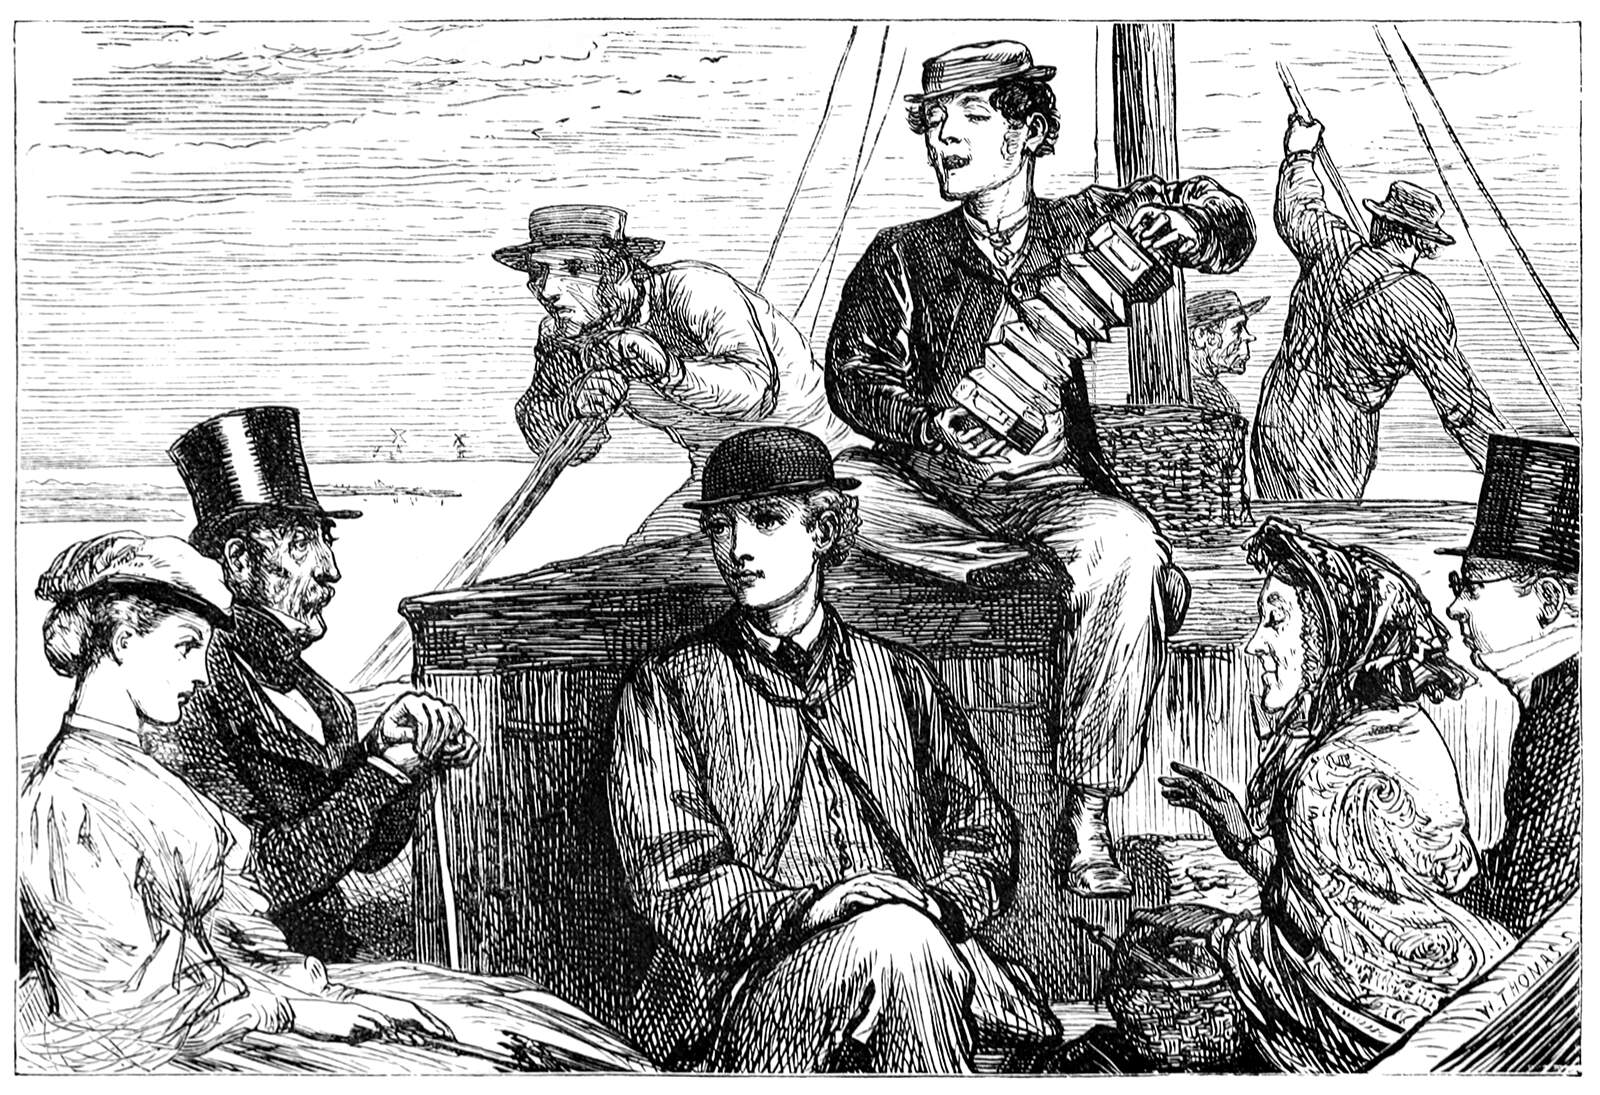 An illustration of a group of people playing music